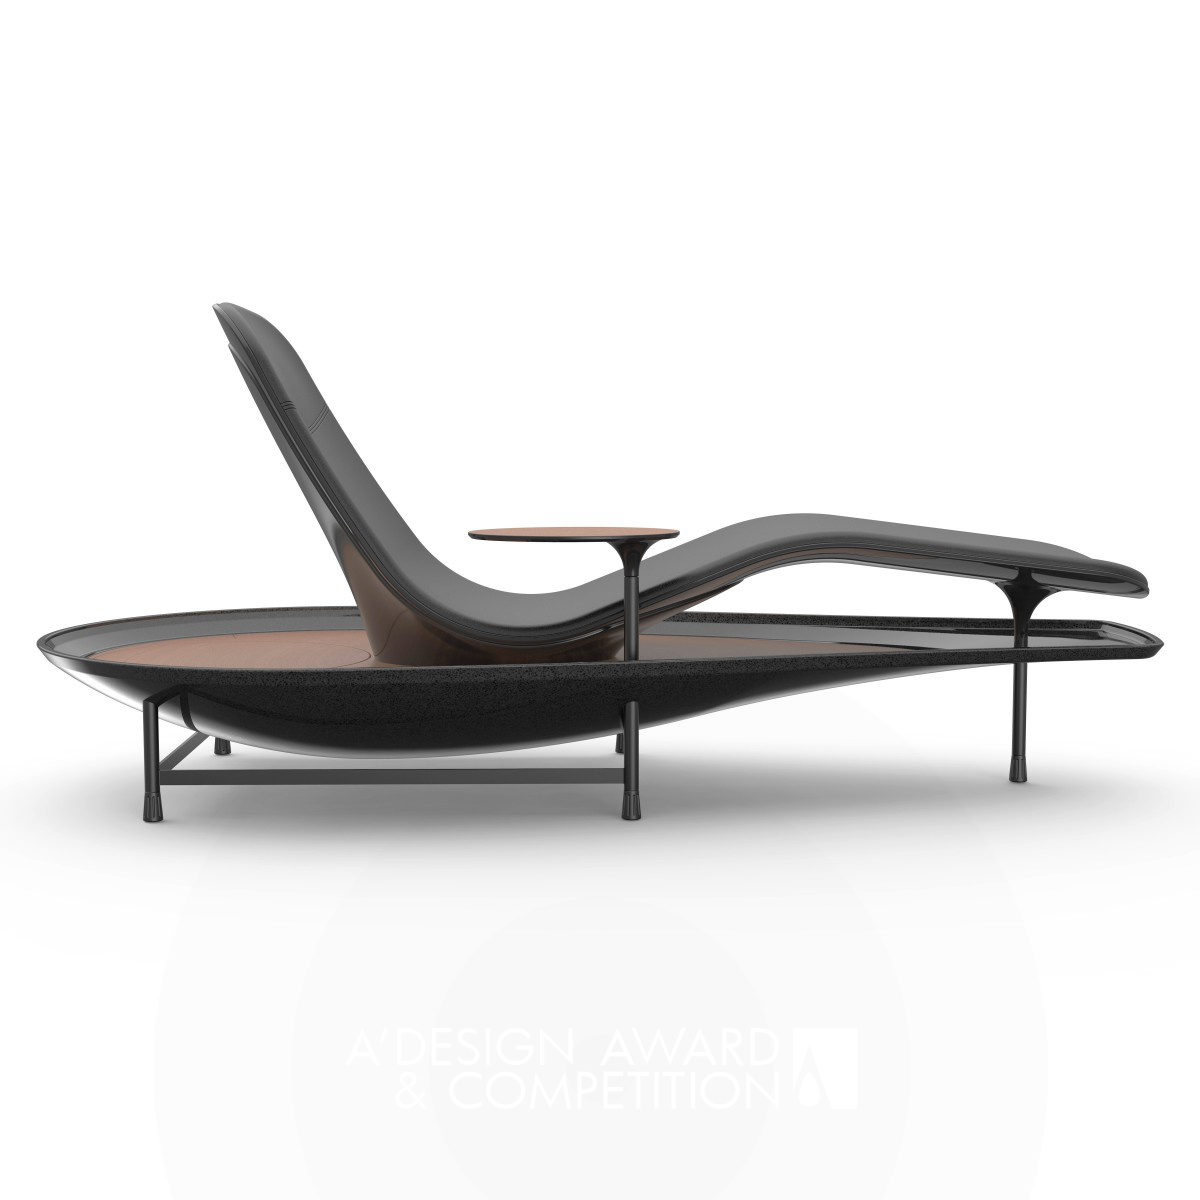 Dhyan Chaise Lounge Concept